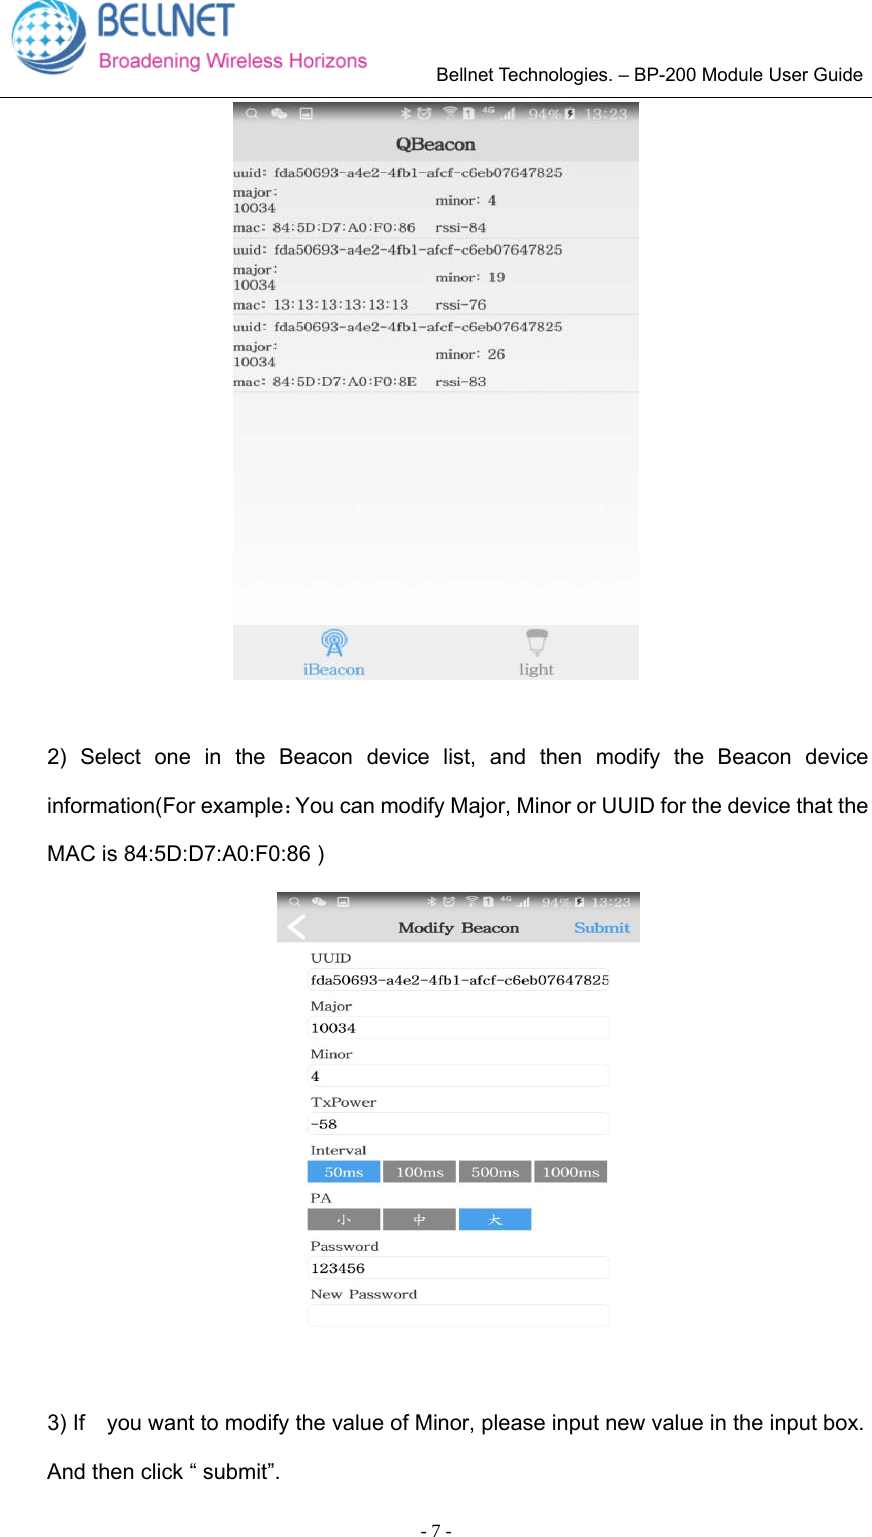        Bellnet Technologies. – BP-200 Module User Guide - 7 - 2) Select one in the Beacon device list, and then modify the Beacon deviceinformation(For example：You can modify Major, Minor or UUID for the device that the MAC is 84:5D:D7:A0:F0:86 ) 3) If    you want to modify the value of Minor, please input new value in the input box.And then click “ submit”. 